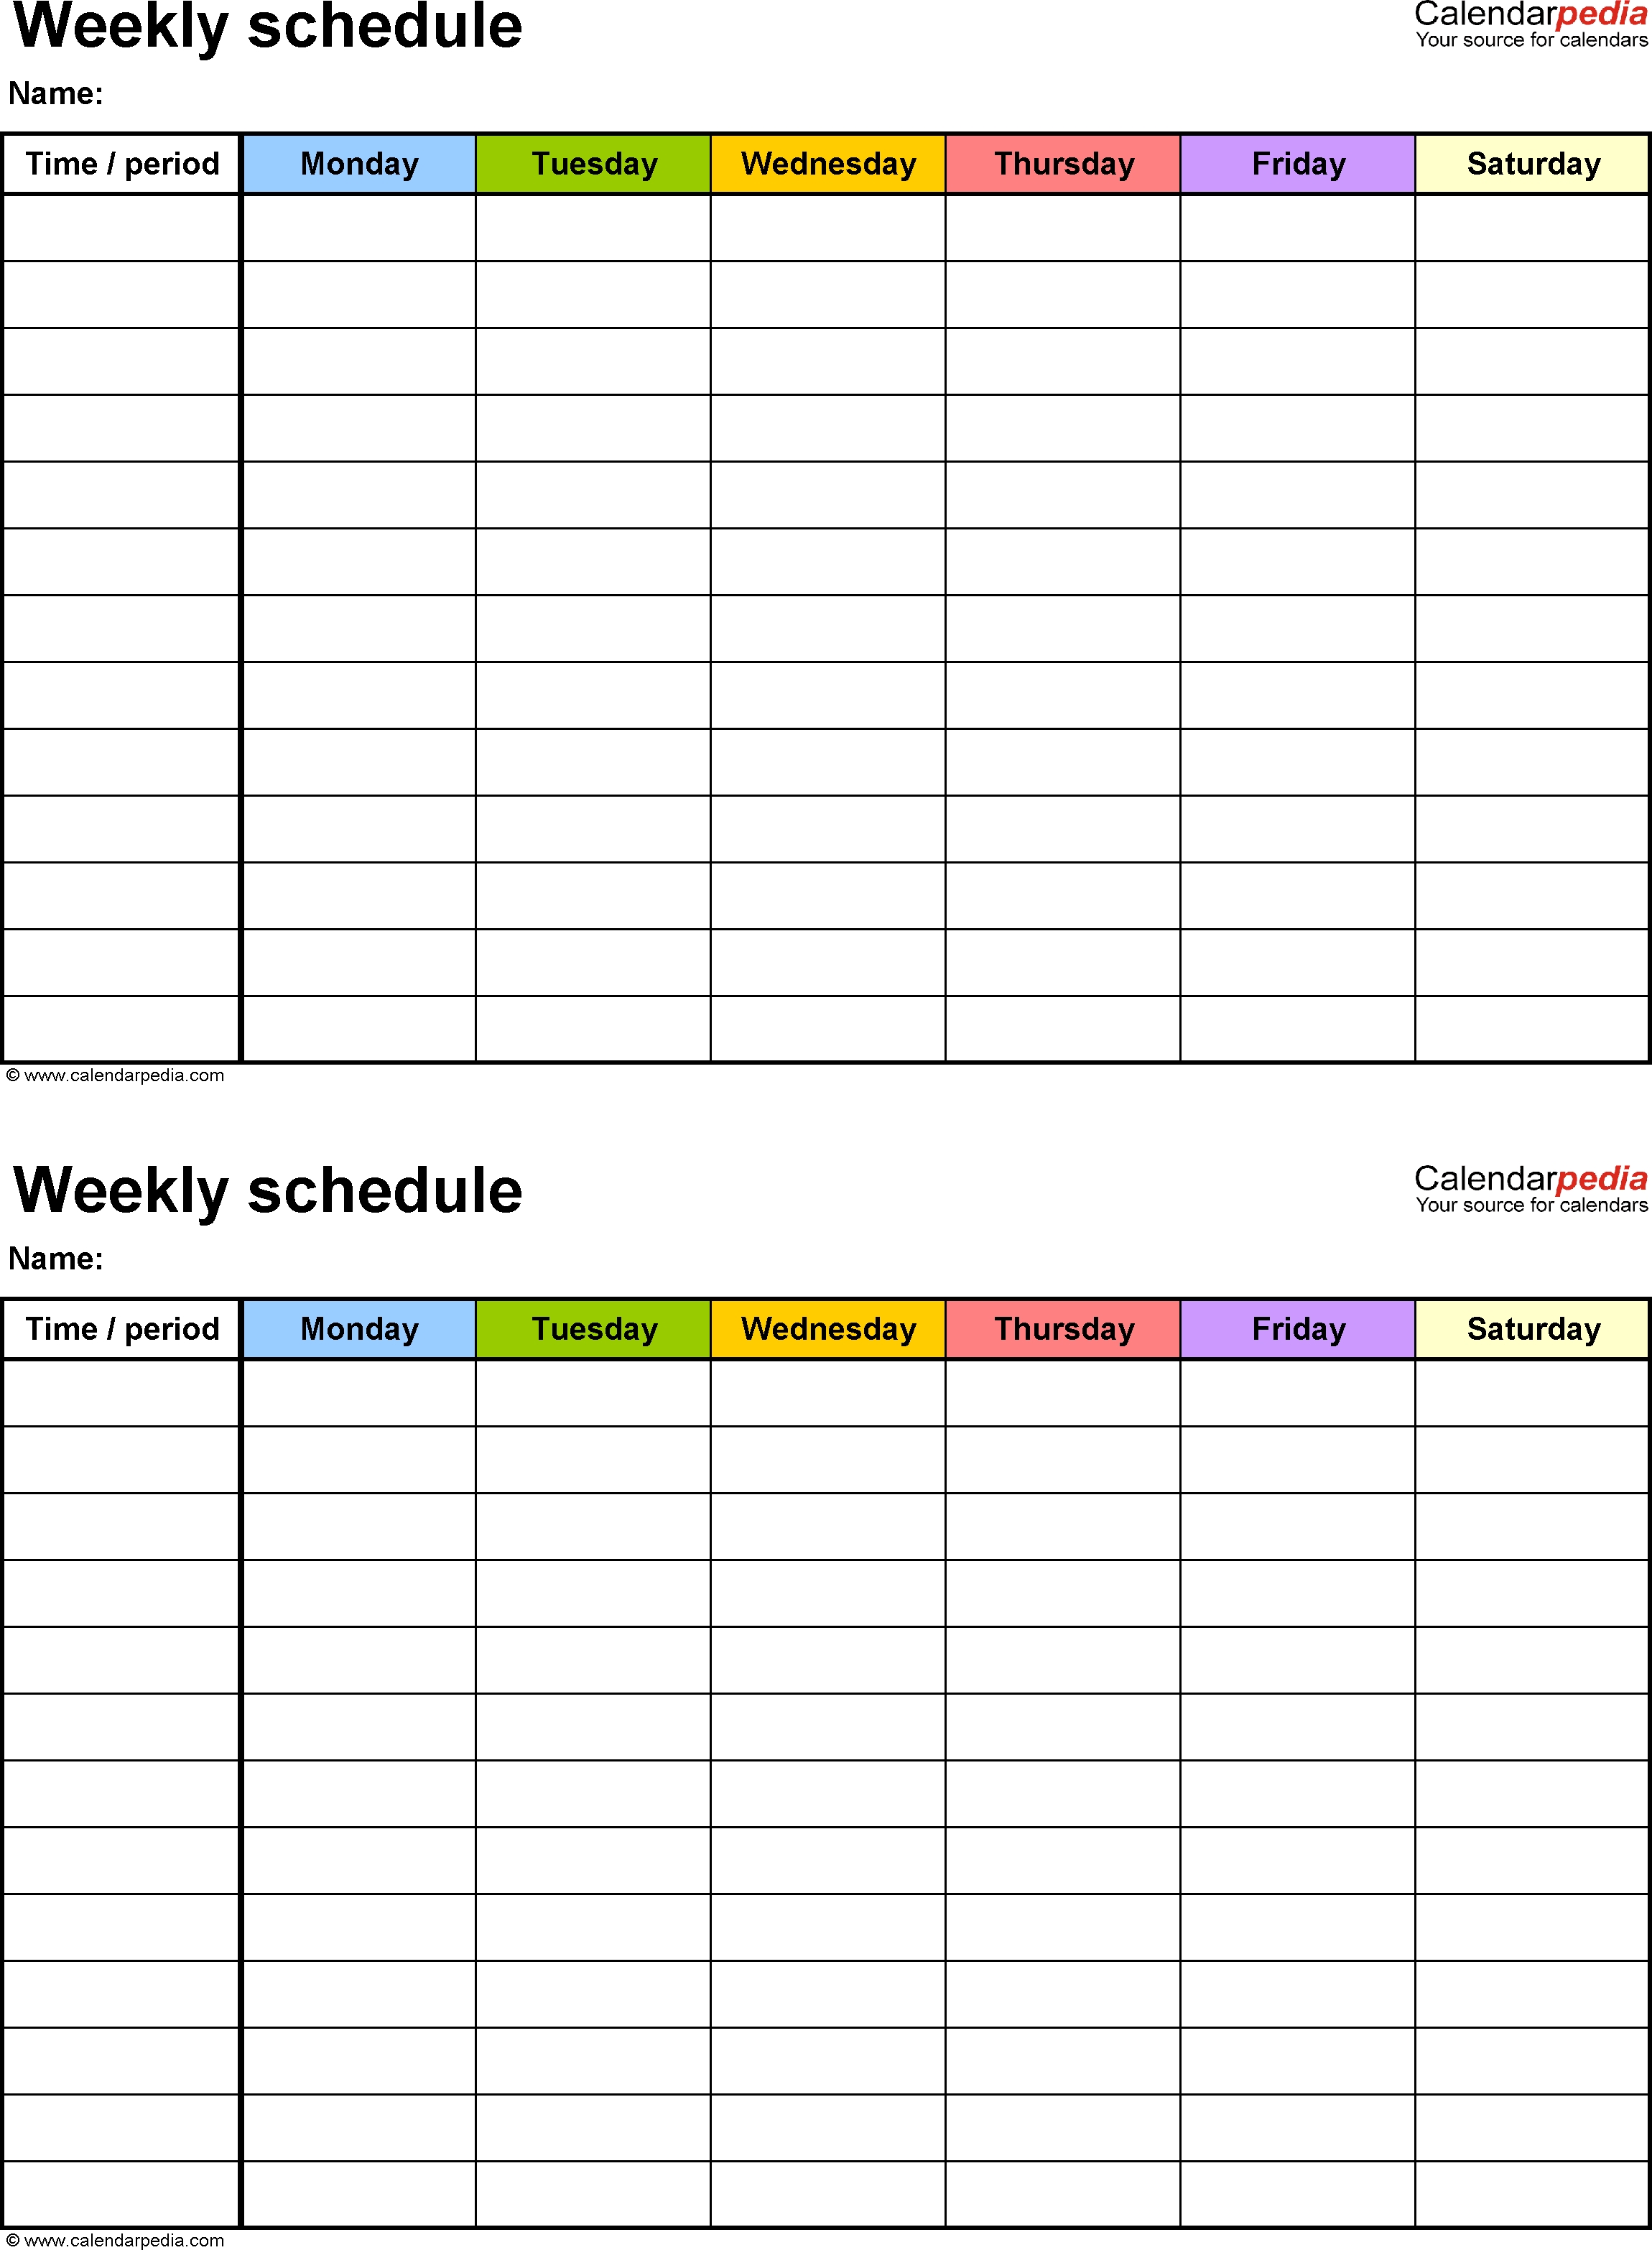 Free Weekly Schedule Templates For Word - 18 Templates regarding Free Printable Blank Employee Schedules